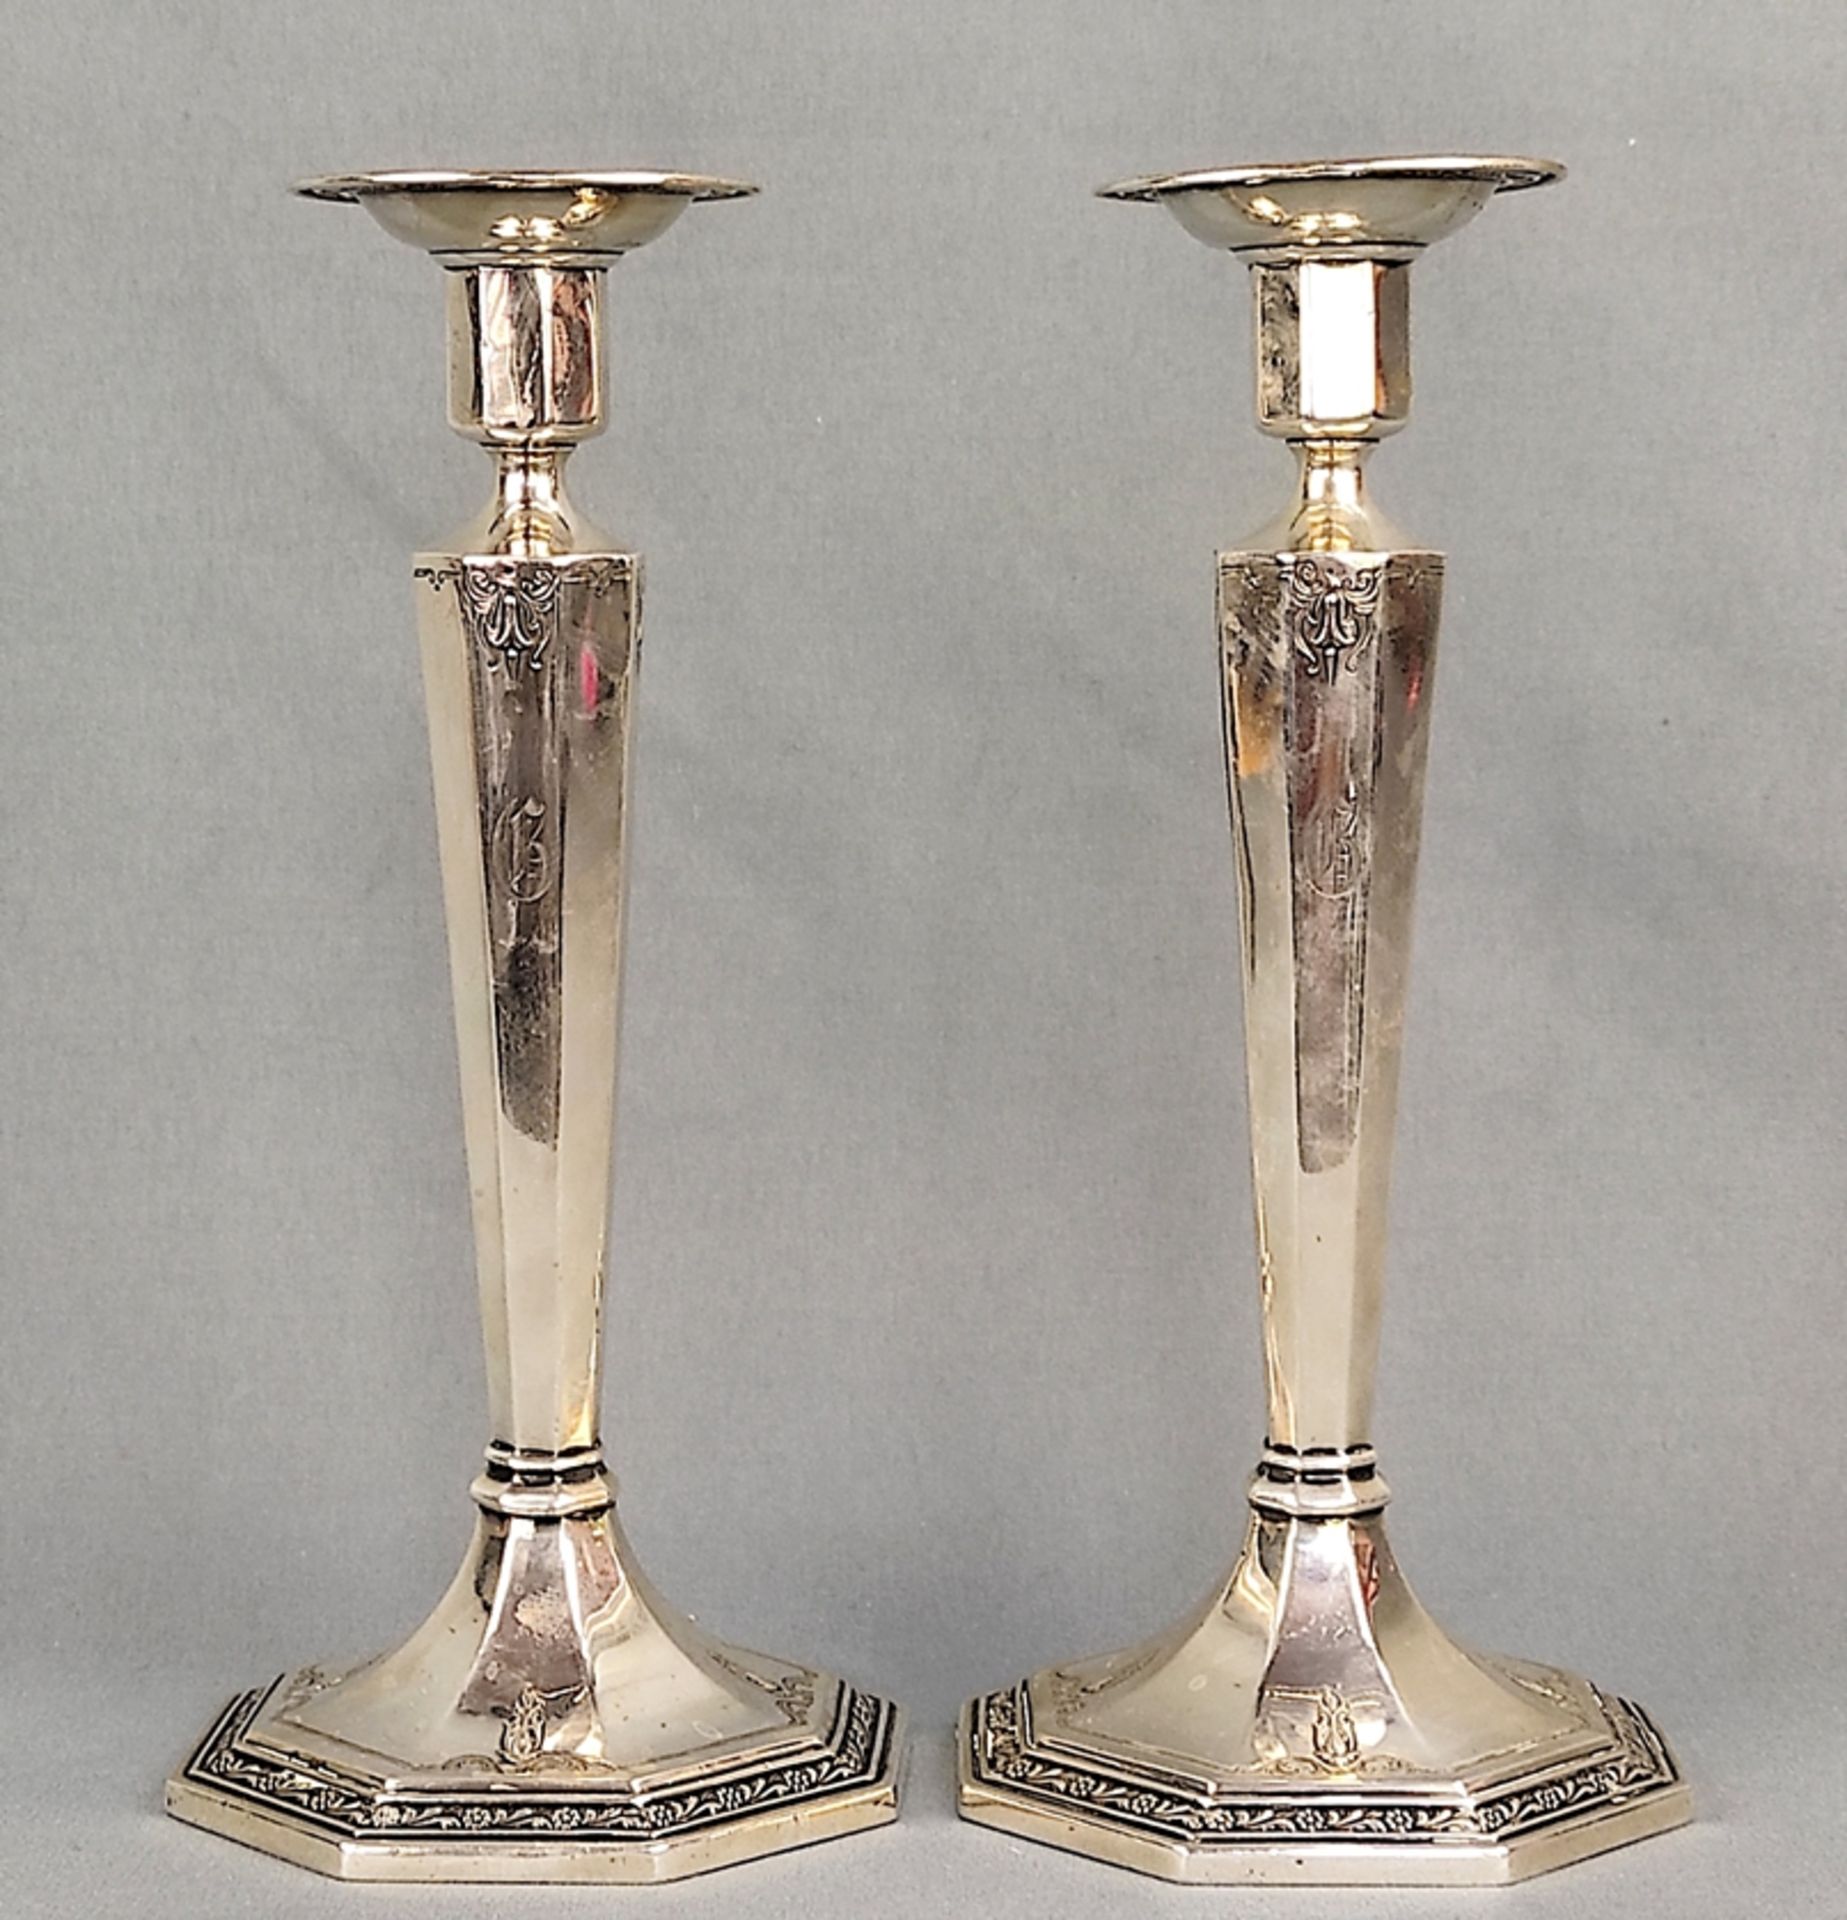 Pair of candlesticks, 925 silver, 901g, 1925, Gorham, America, octagonal stand, decorated with flor